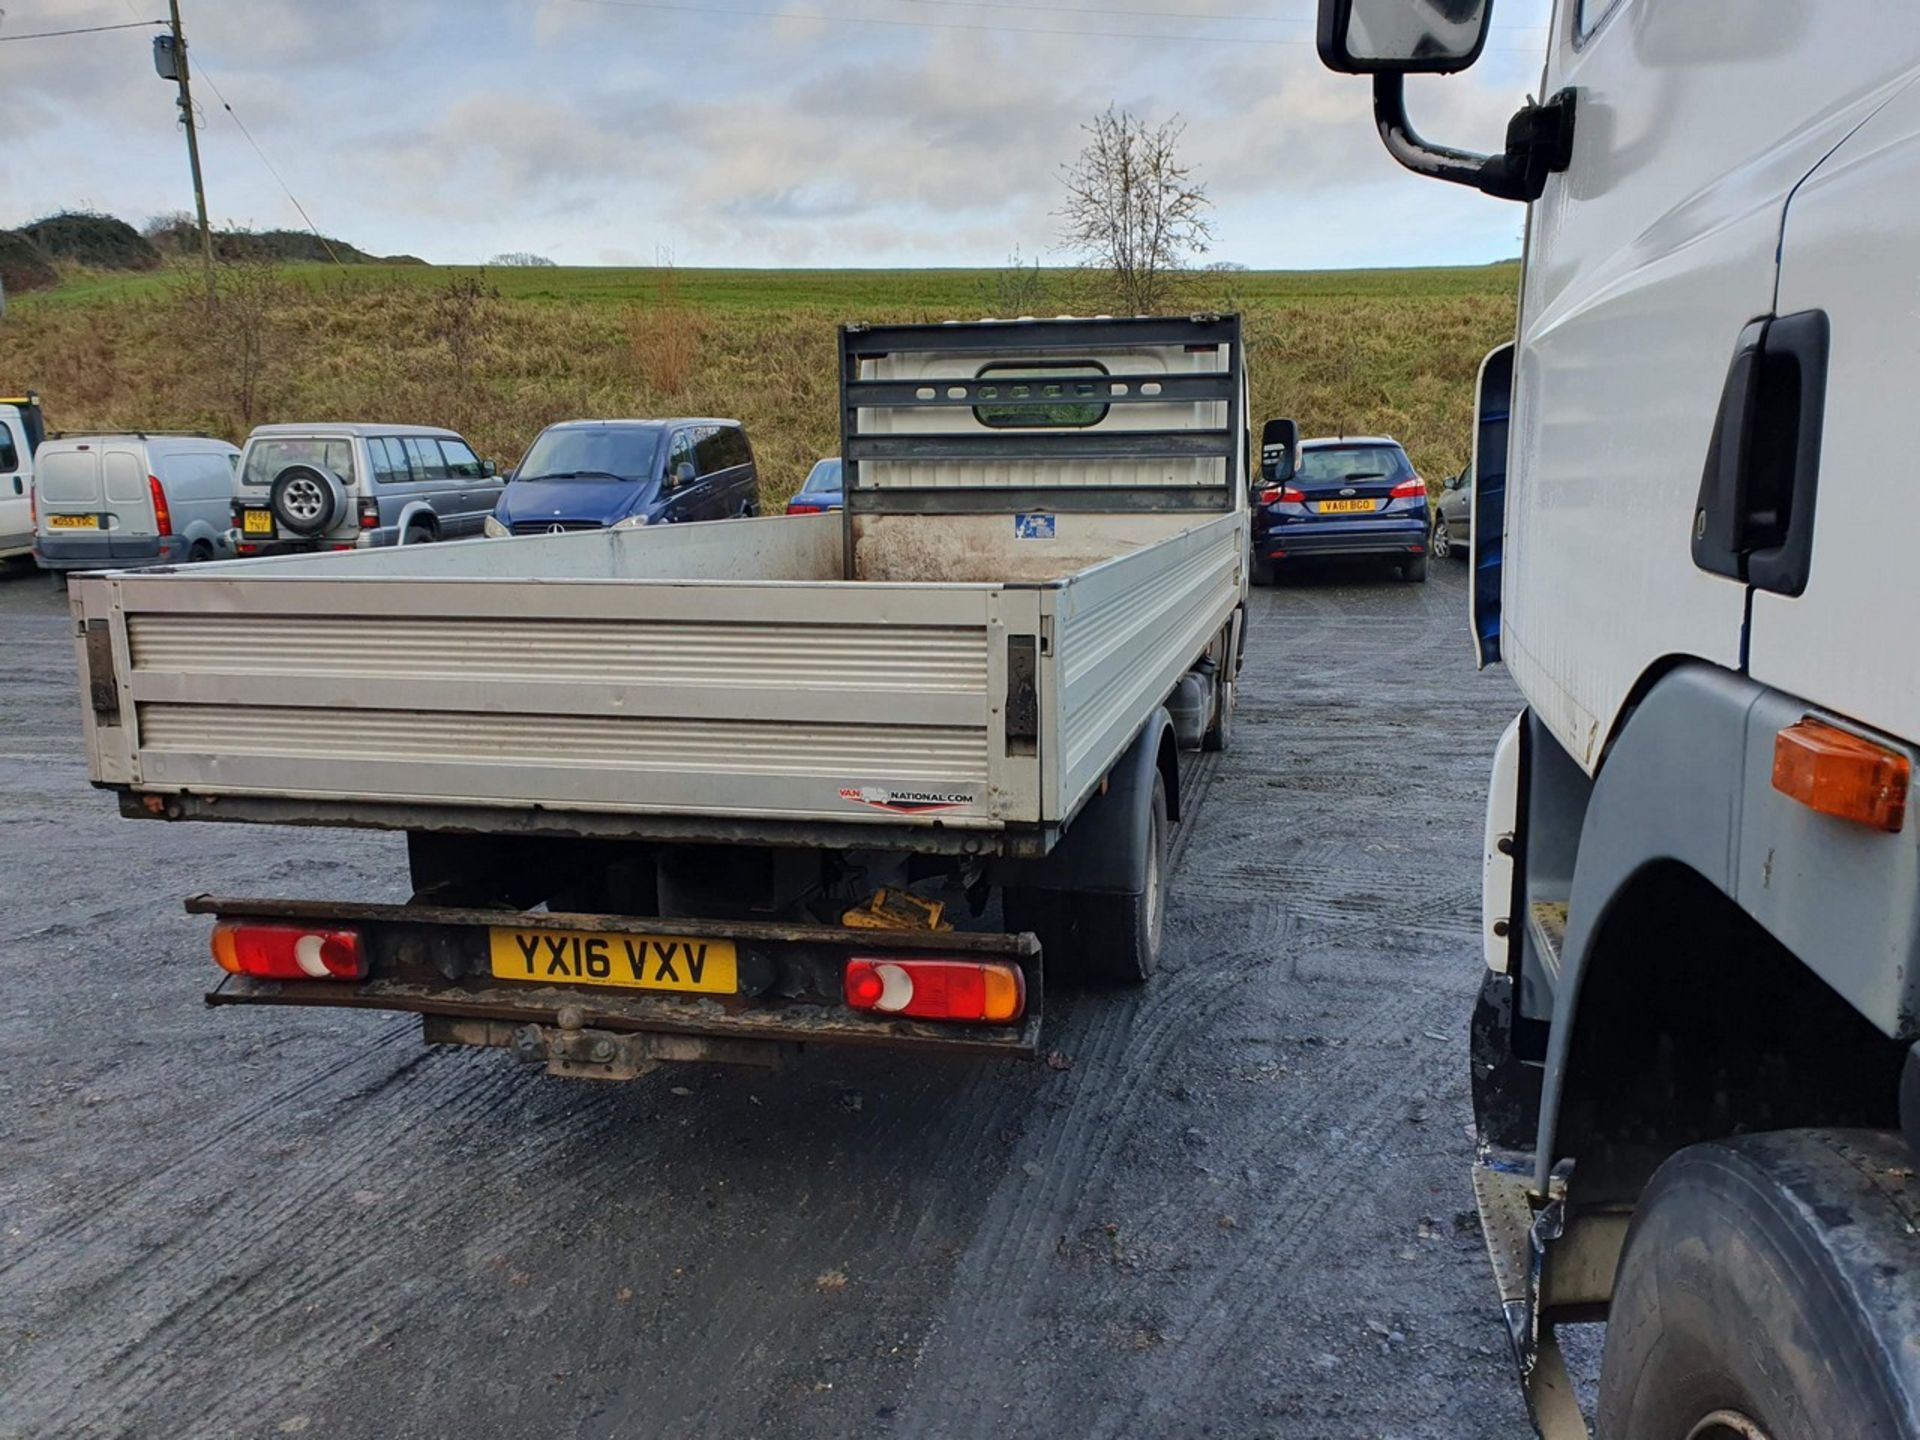 16/16 NISSAN NT400 CABSTAR 35.14 LWB D - 2488cc 2dr Flat Bed (White) - Image 12 of 33